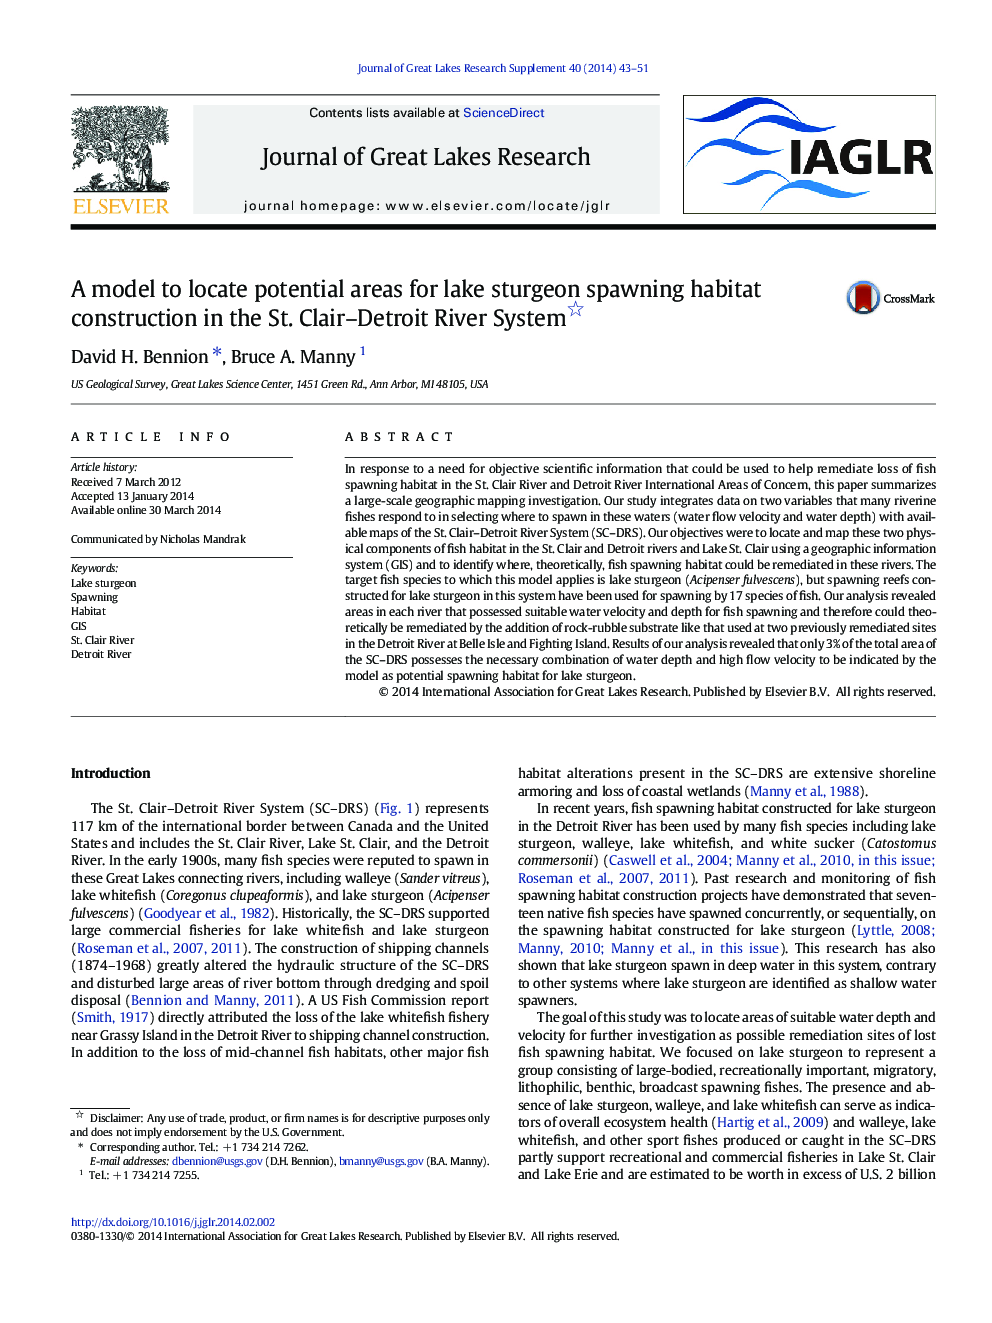 A model to locate potential areas for lake sturgeon spawning habitat construction in the St. Clair–Detroit River System 